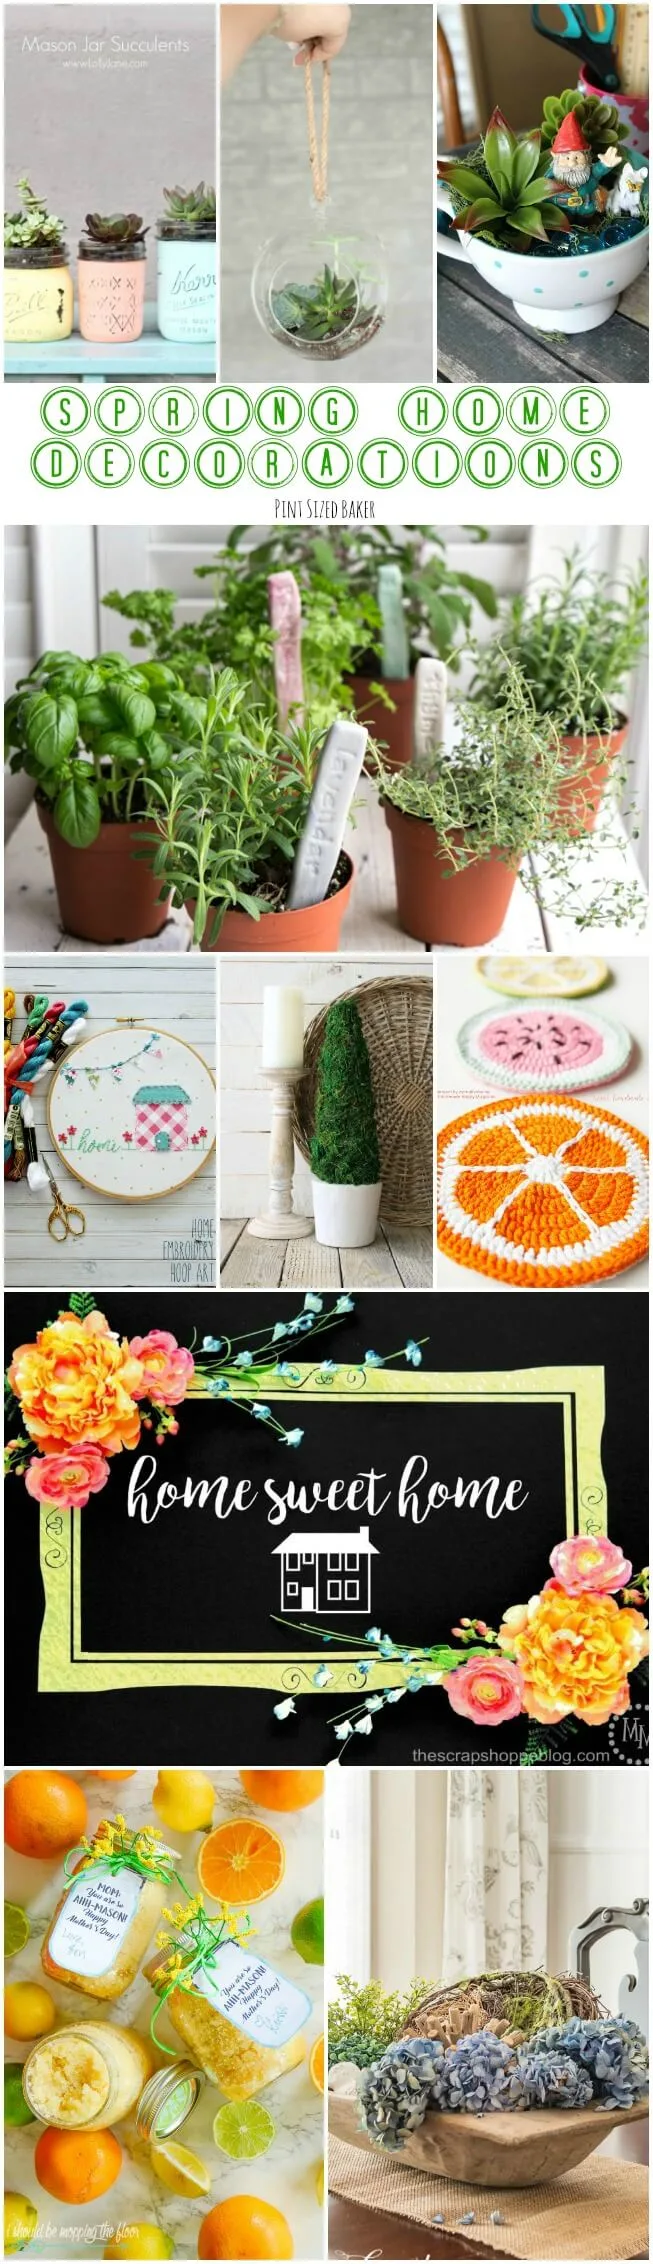 Time to sweep away the winter cobwebs and get your home brightened up for warmer weather with these 10 Spring Home Decorations Ideas.